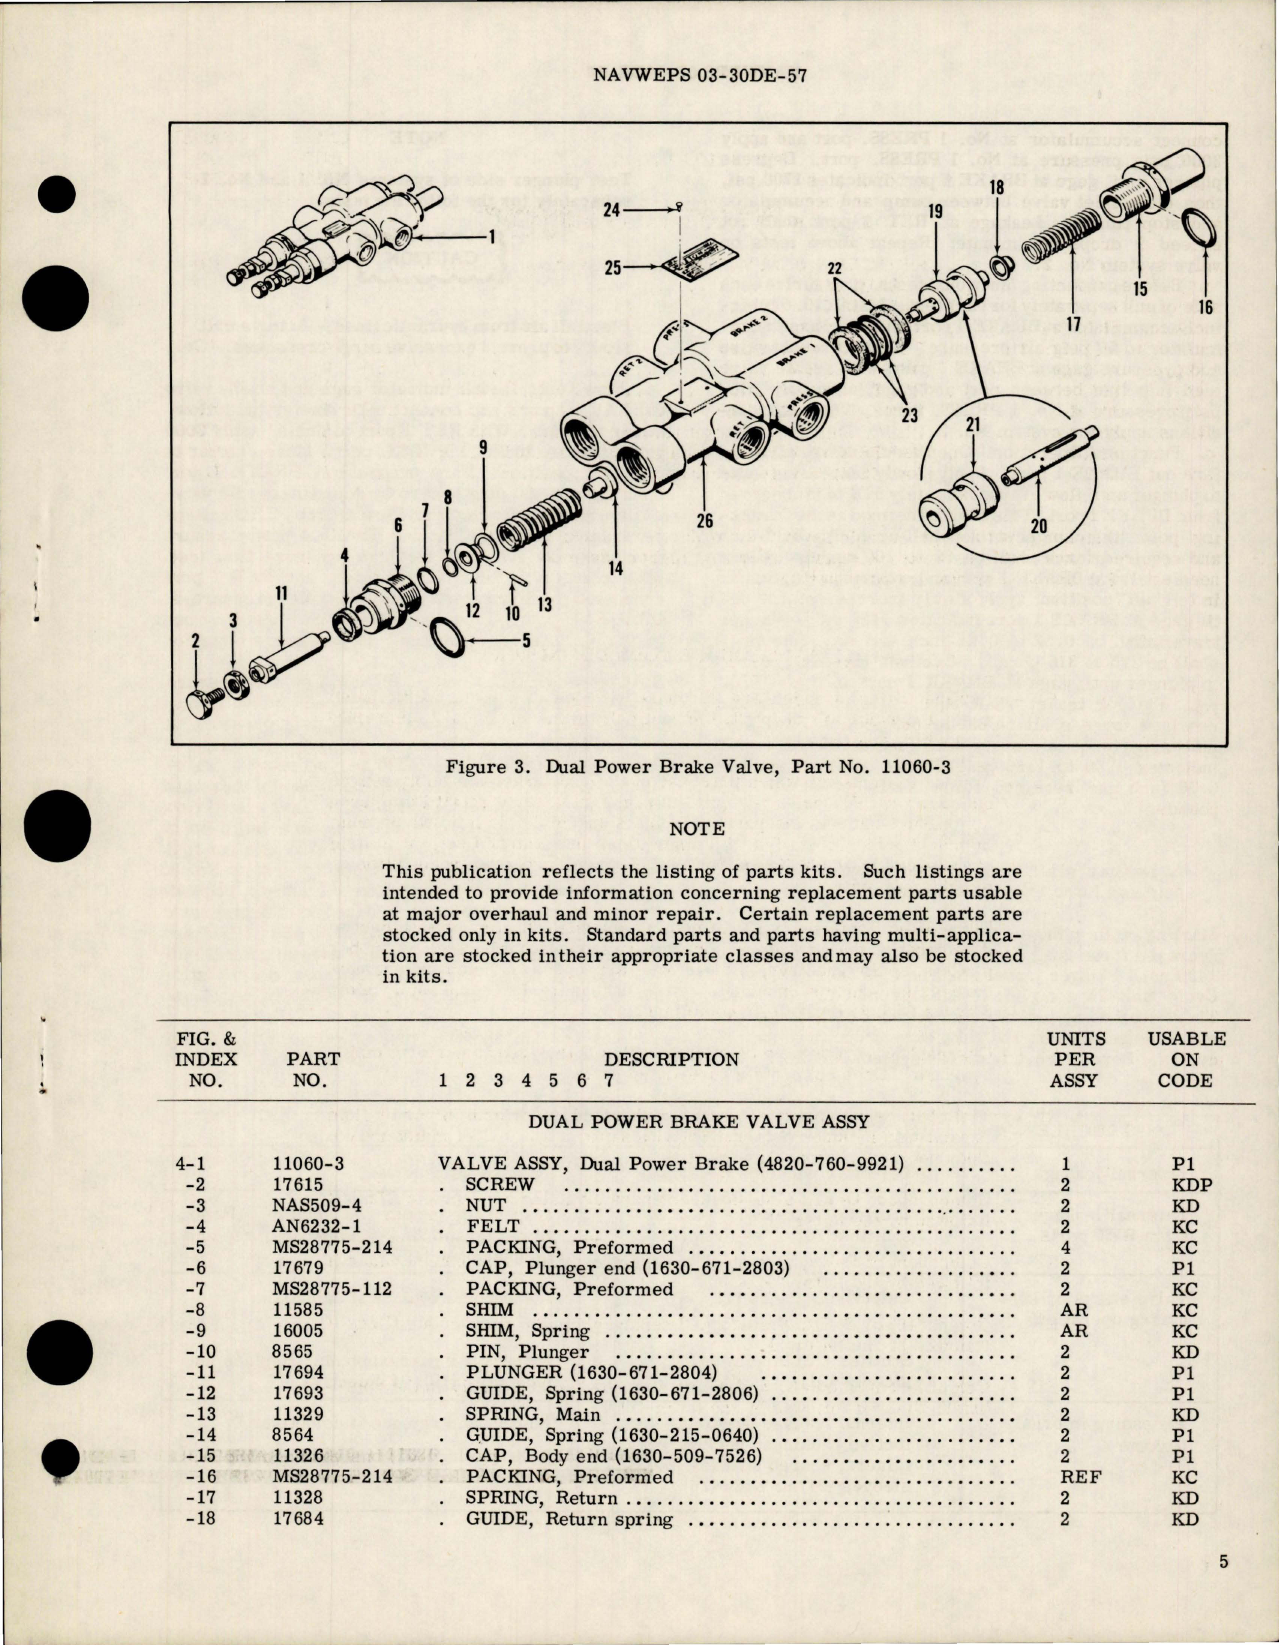 Sample page 5 from AirCorps Library document: Overhaul Instructions with Parts for Dual Power Brake Valve - Part 11060-3 